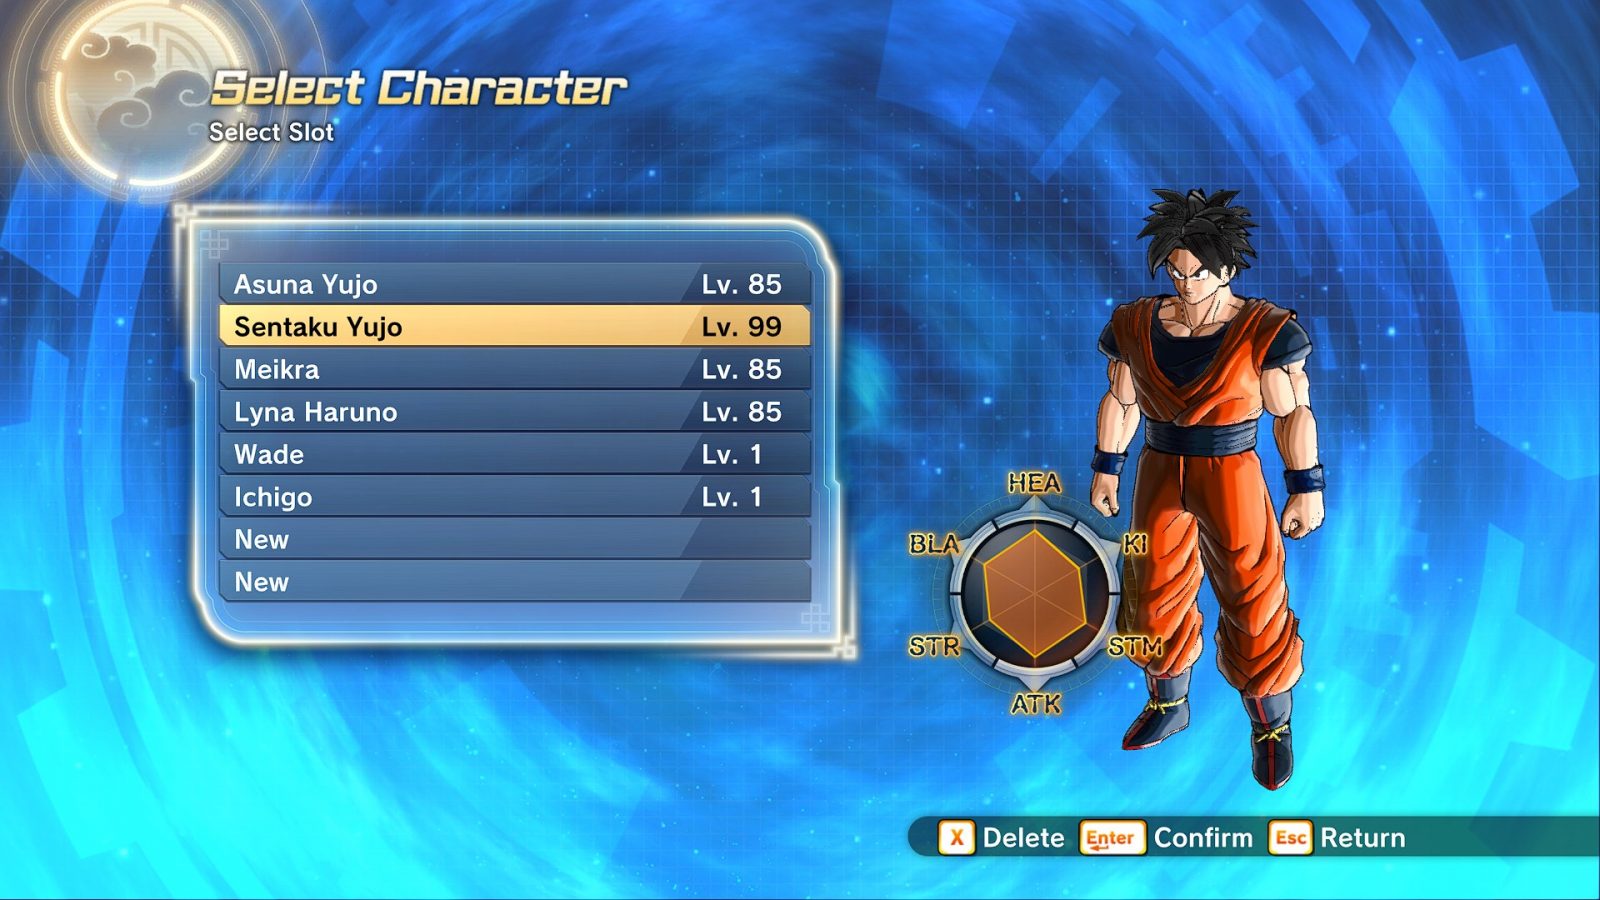 I'm creating a FREE mod for Xenoverse 2 with the goal to rework